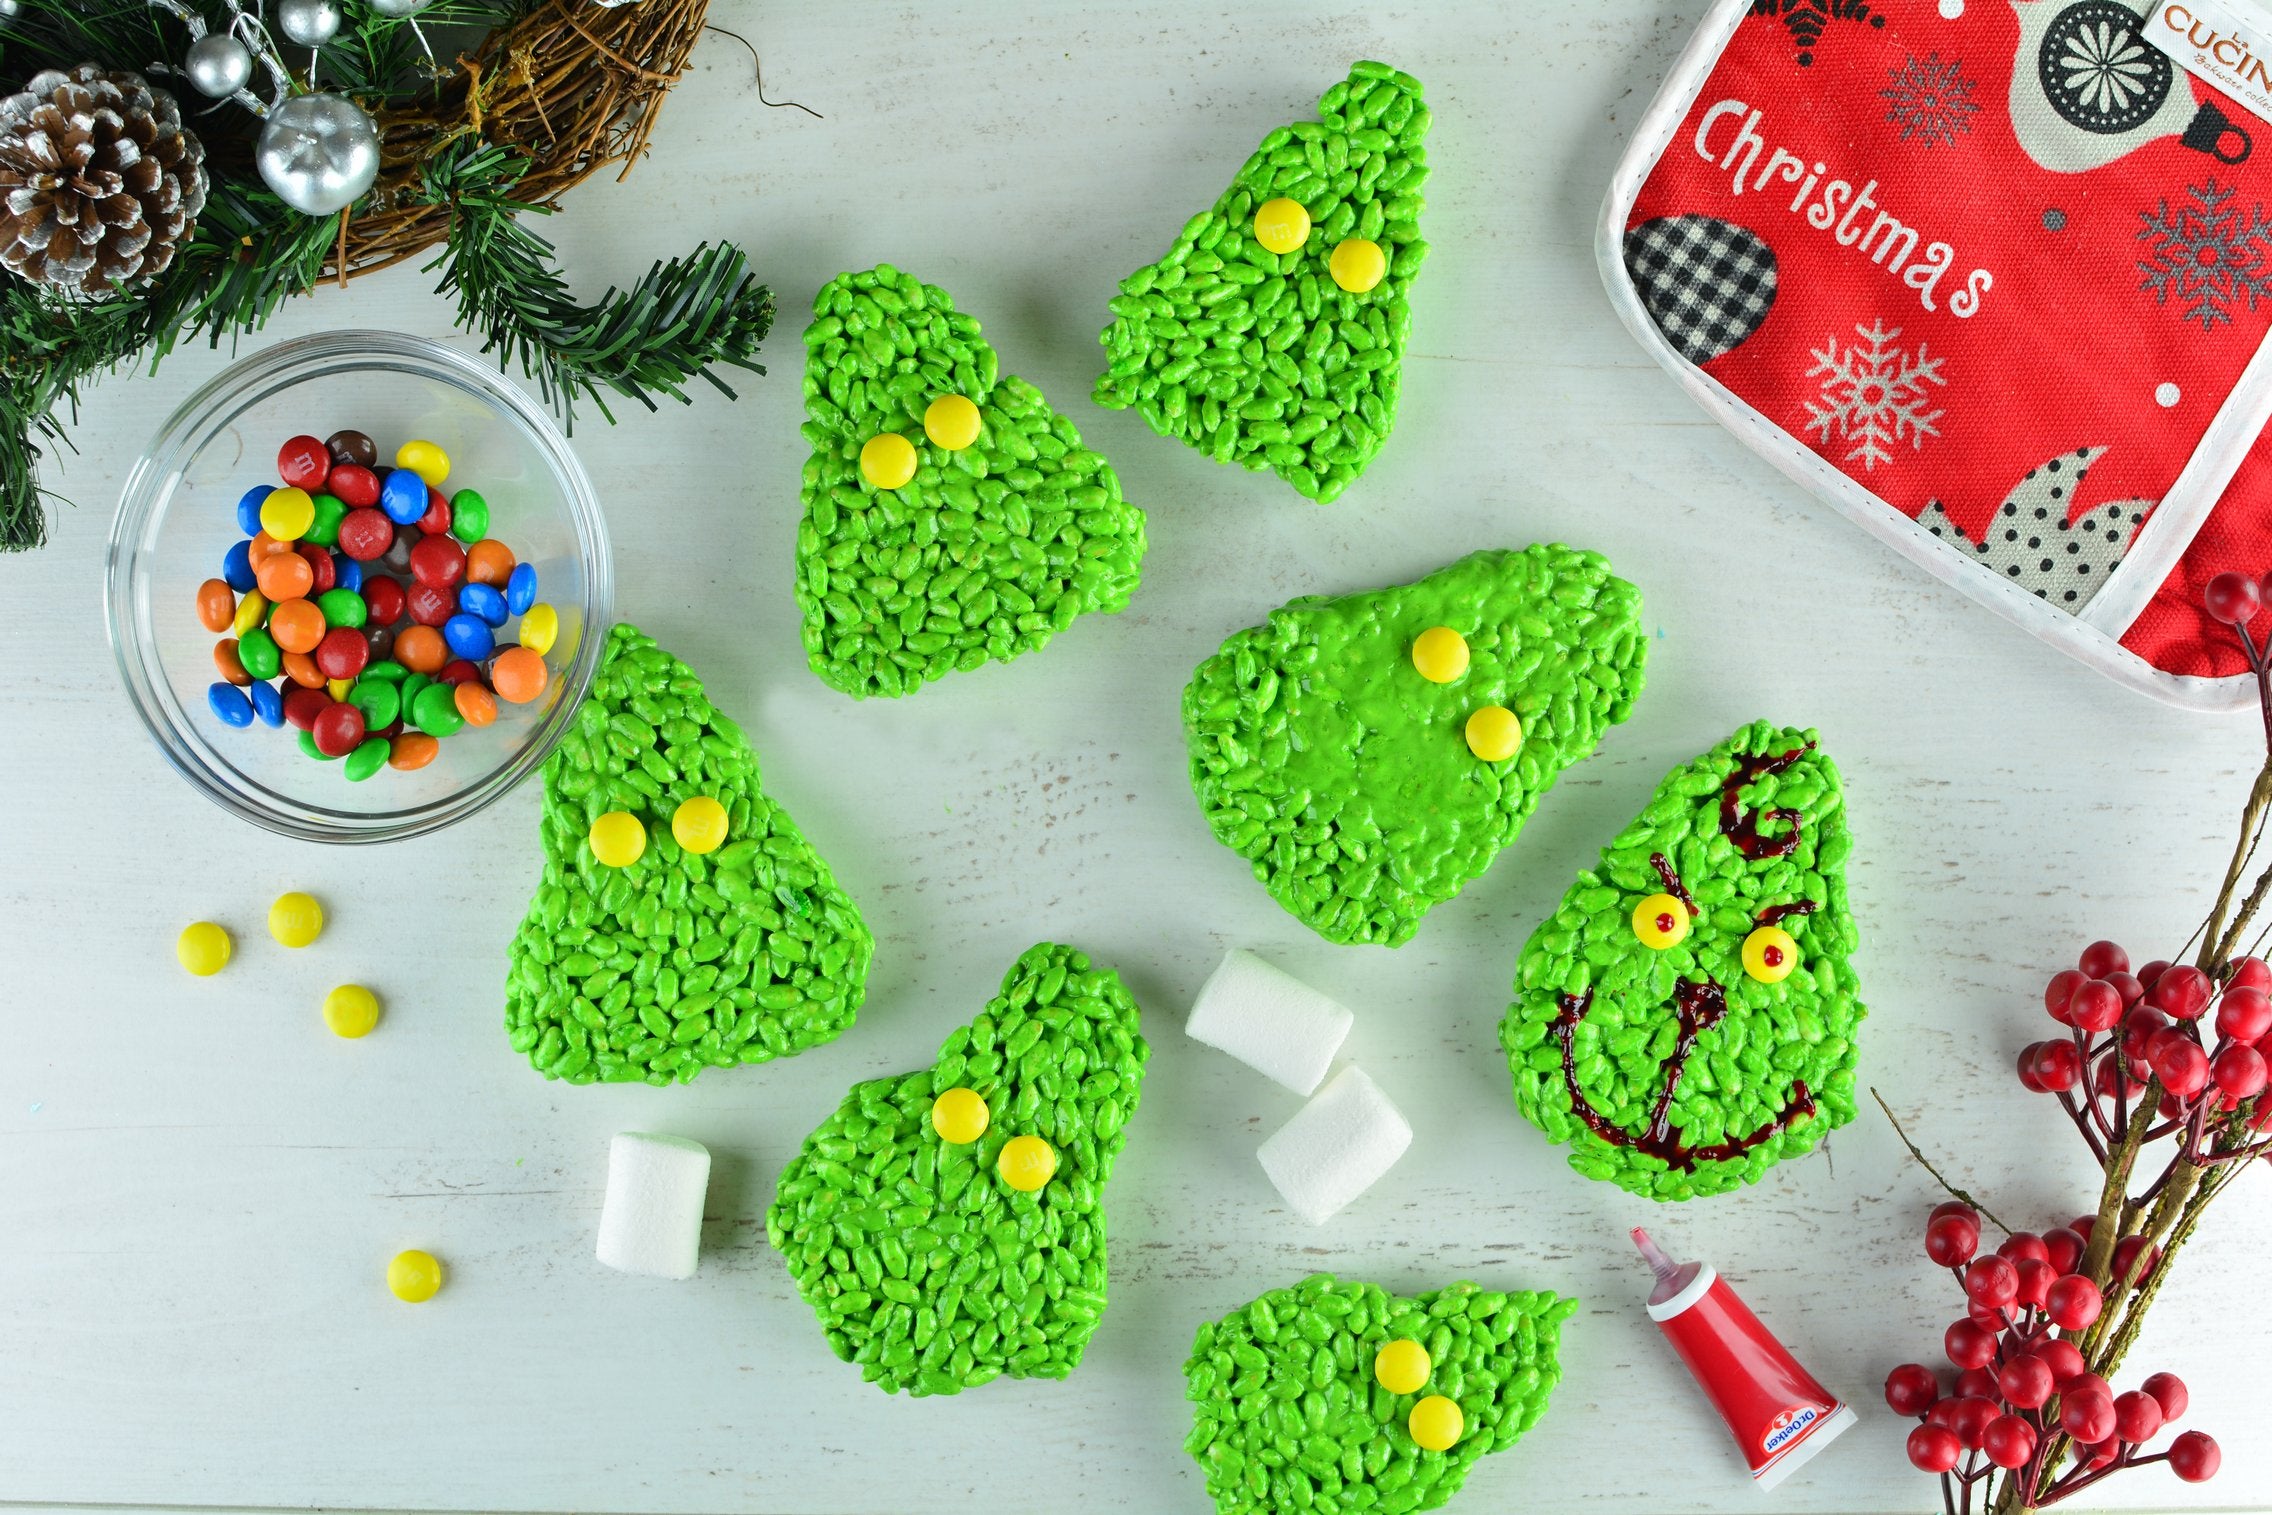 marshmallow-matcha-grinch-cookies-with-m-m-s-decorating